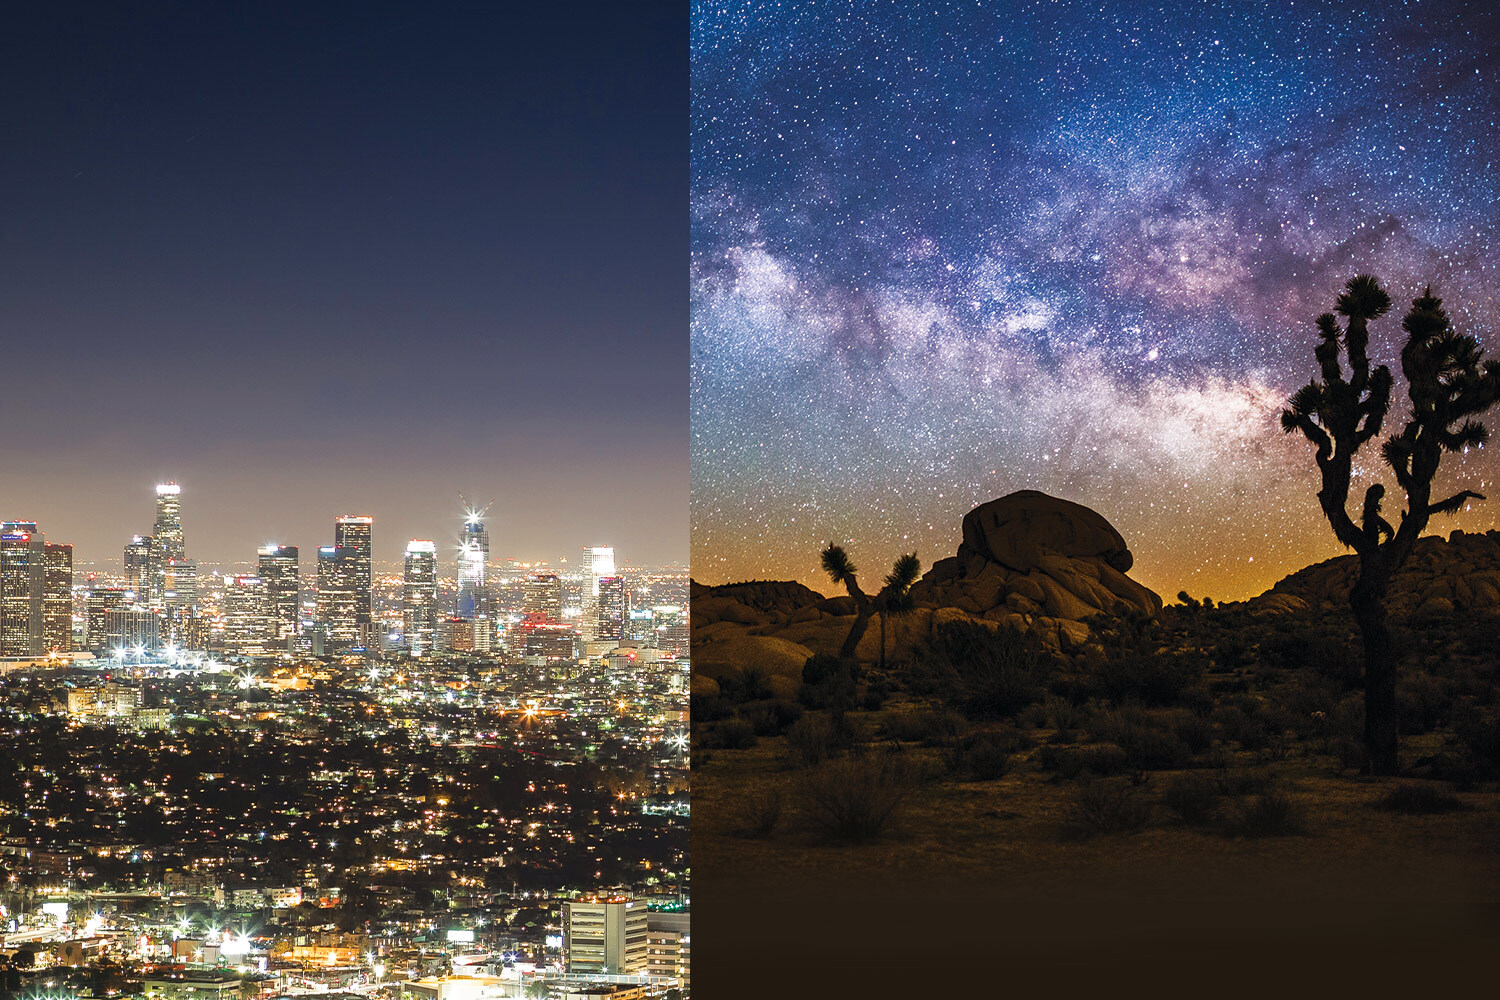 Los Angeles lit up with light pollution at night, versus a photo of the stars as seen on a night in the desert